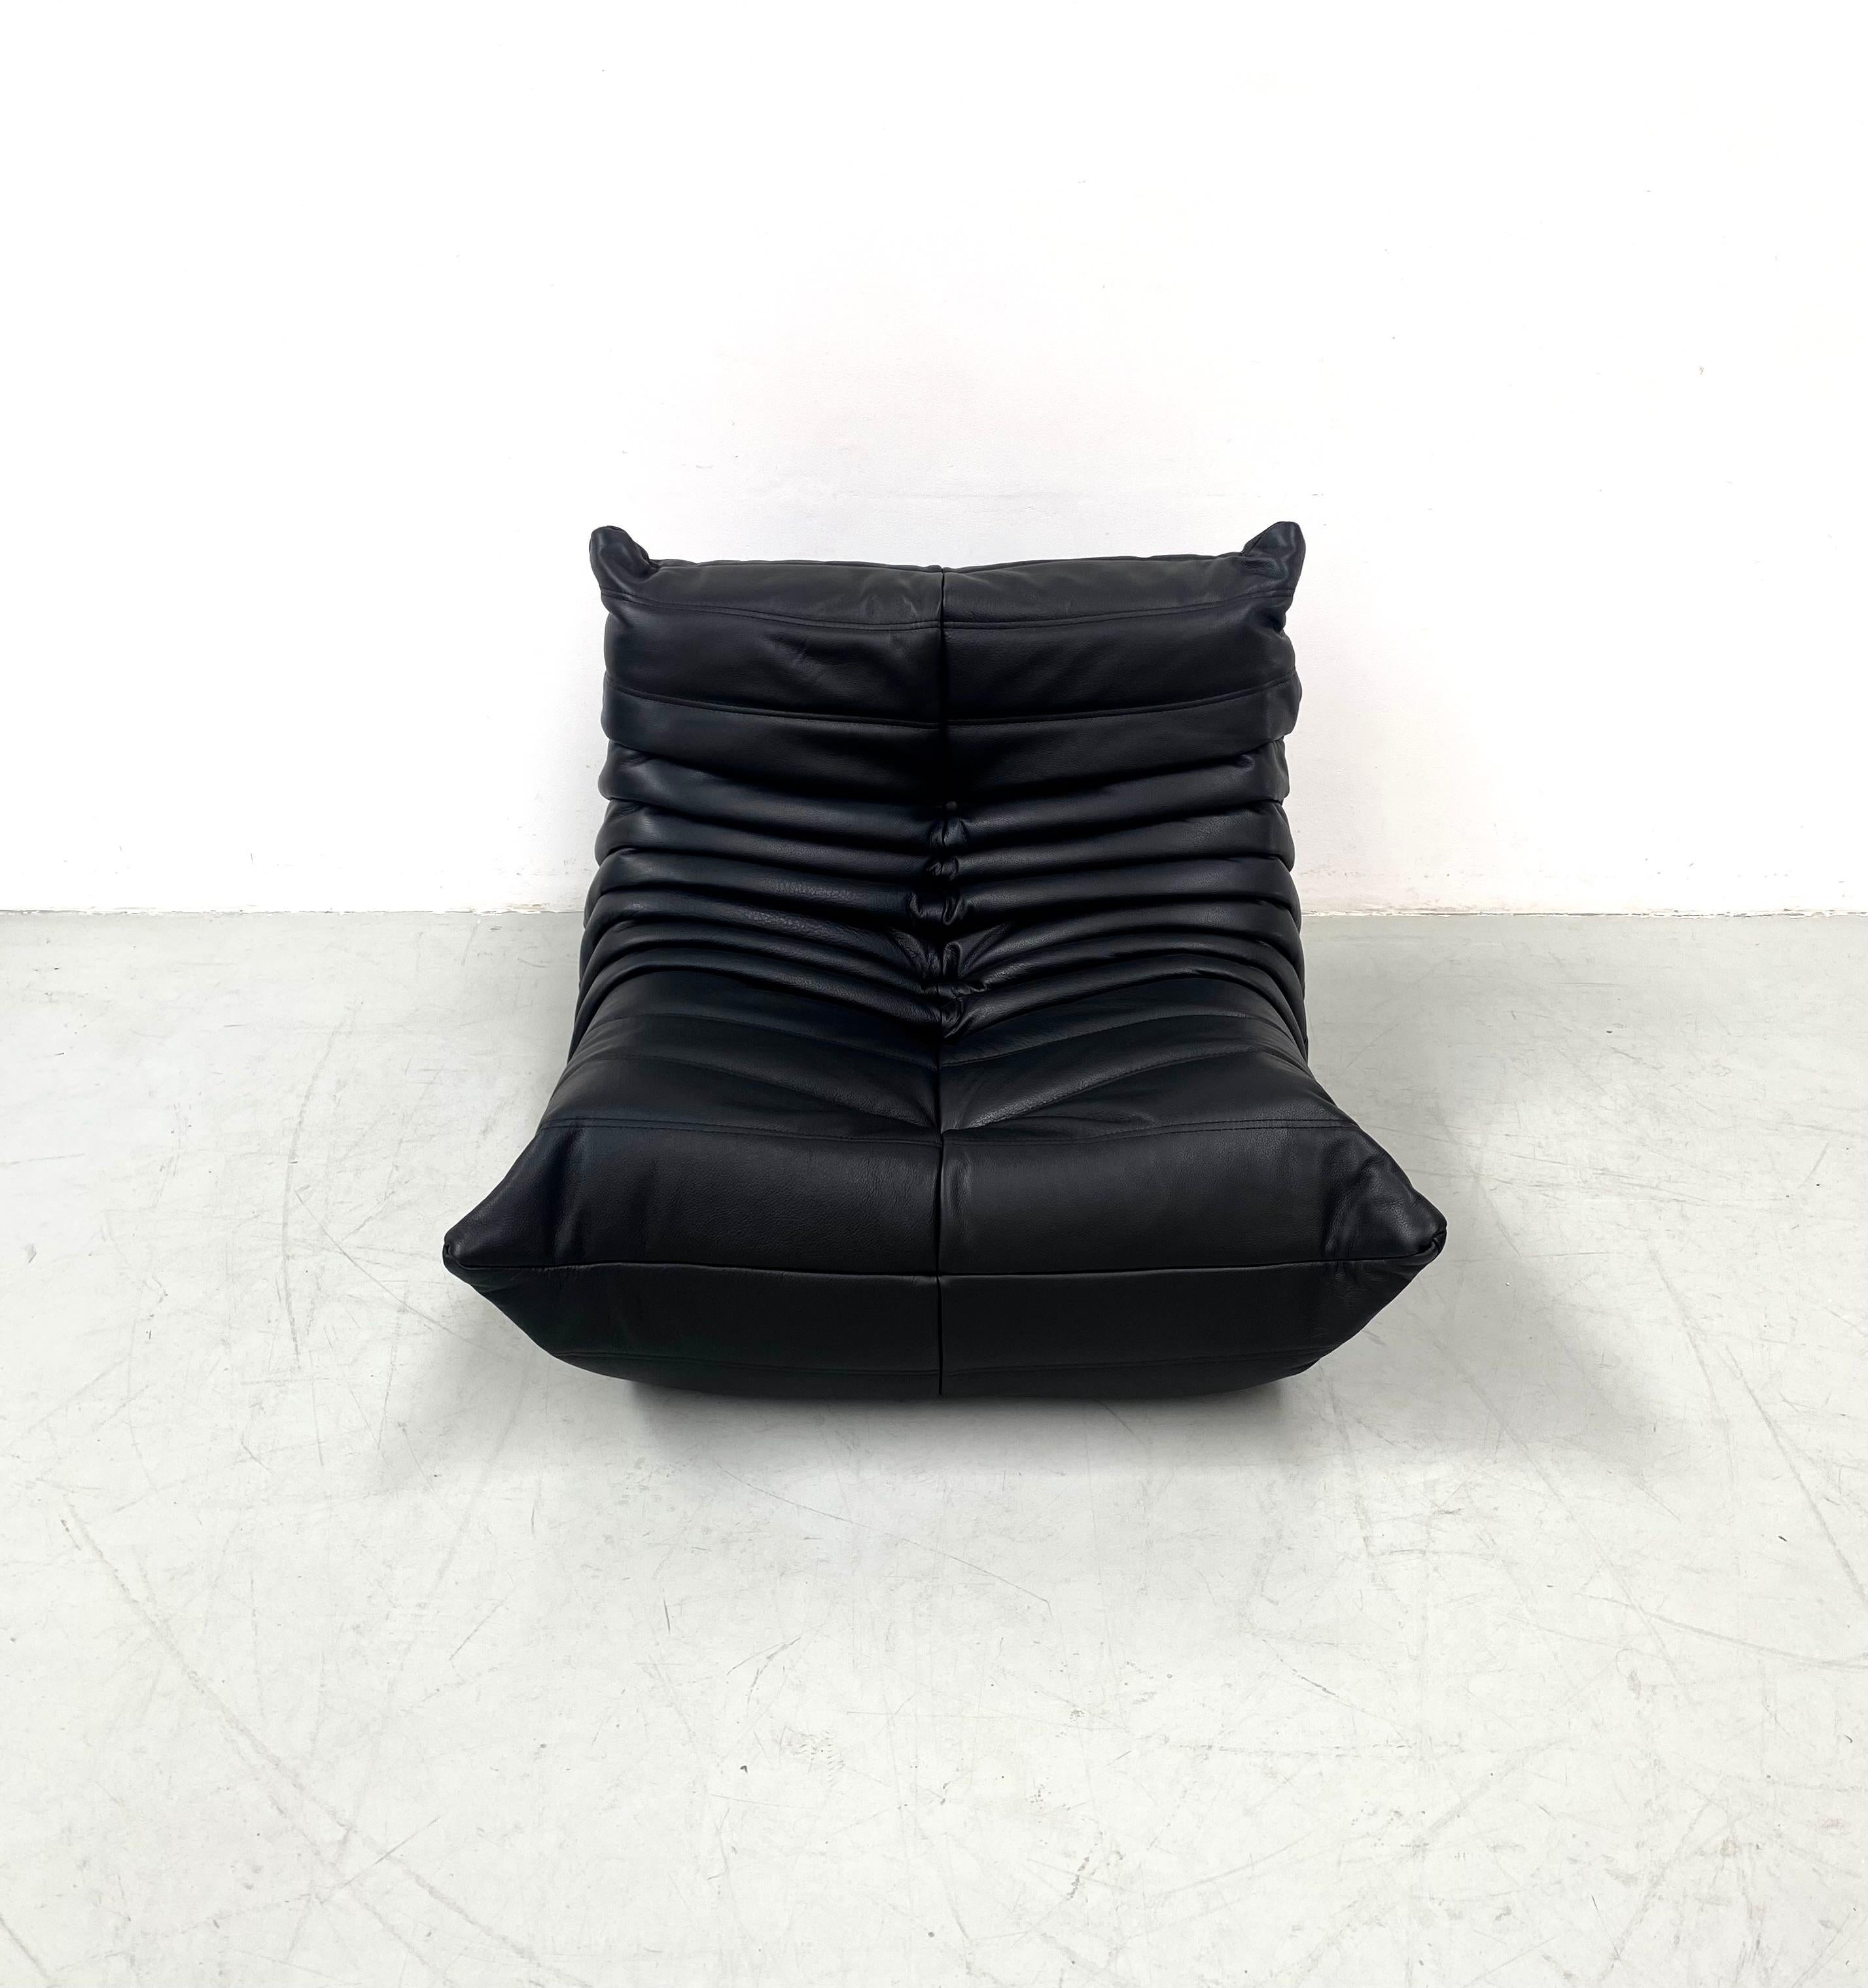 togo leather chair